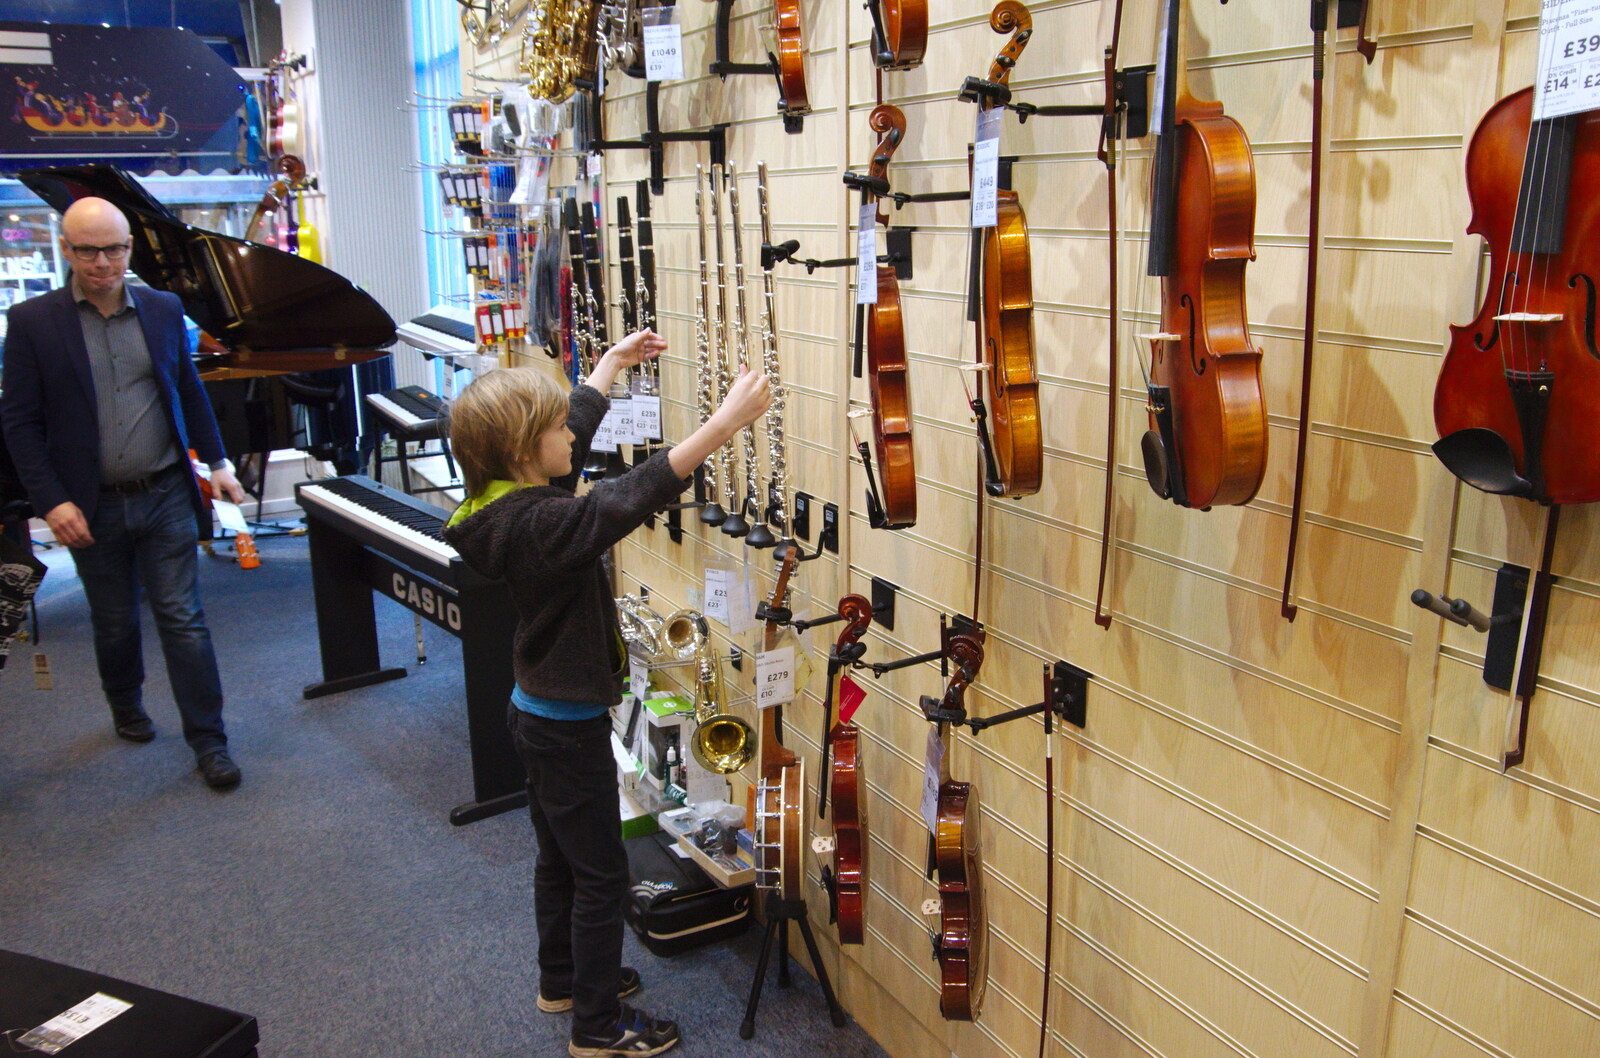 Harry looks at flutes and violins in Cooke's from A Spot of Christmas Shopping, Norwich, Norfolk - 23rd December 2019